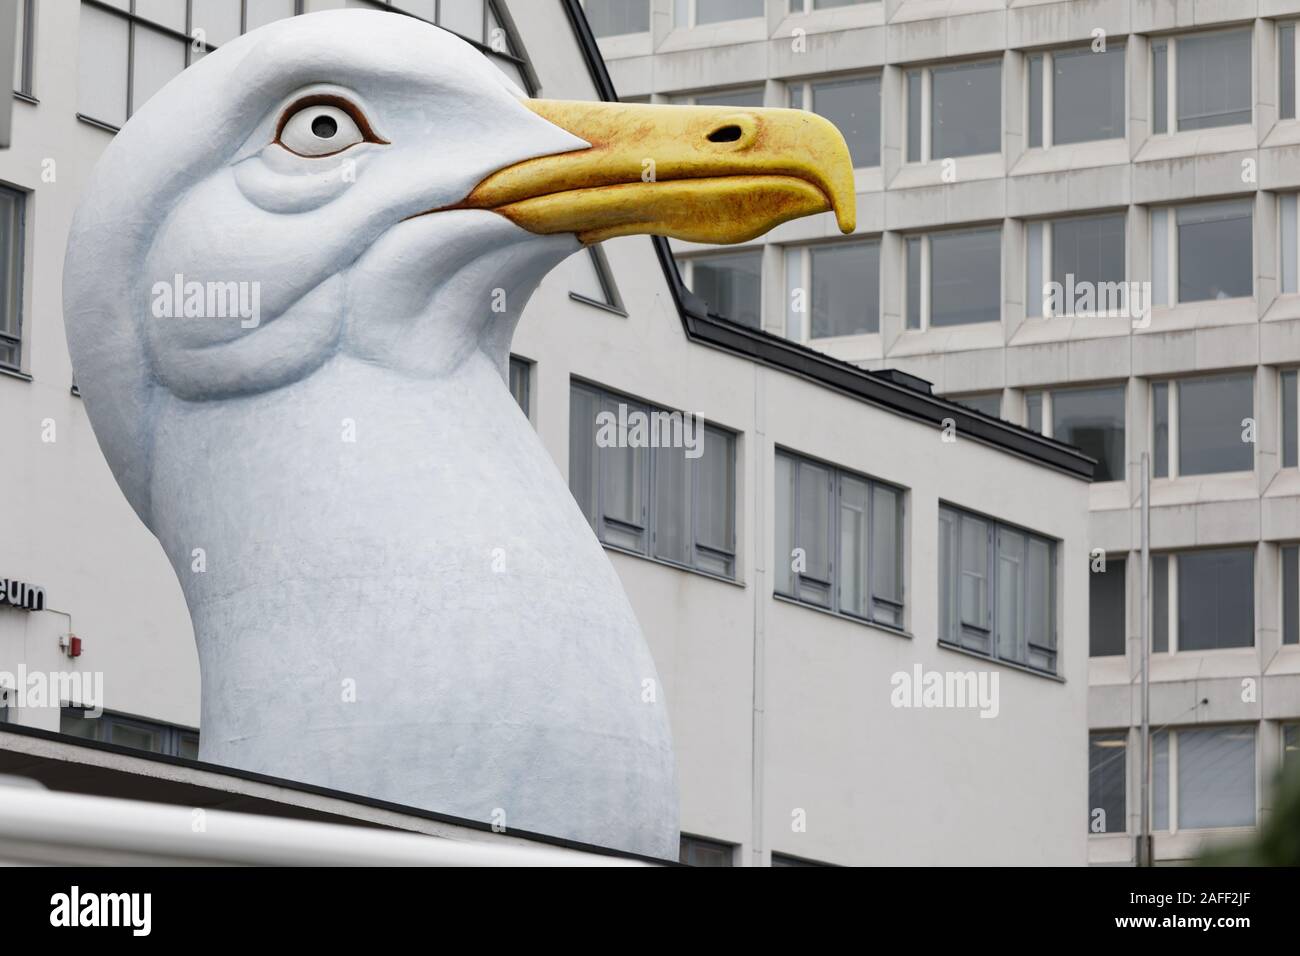 Helsinki, Finland - June 12, 2018: Head of seagull designed by Villu  Jaanisoo on the entrance of Helsinki Art Museum on the north end of Tennis  Palace Stock Photo - Alamy